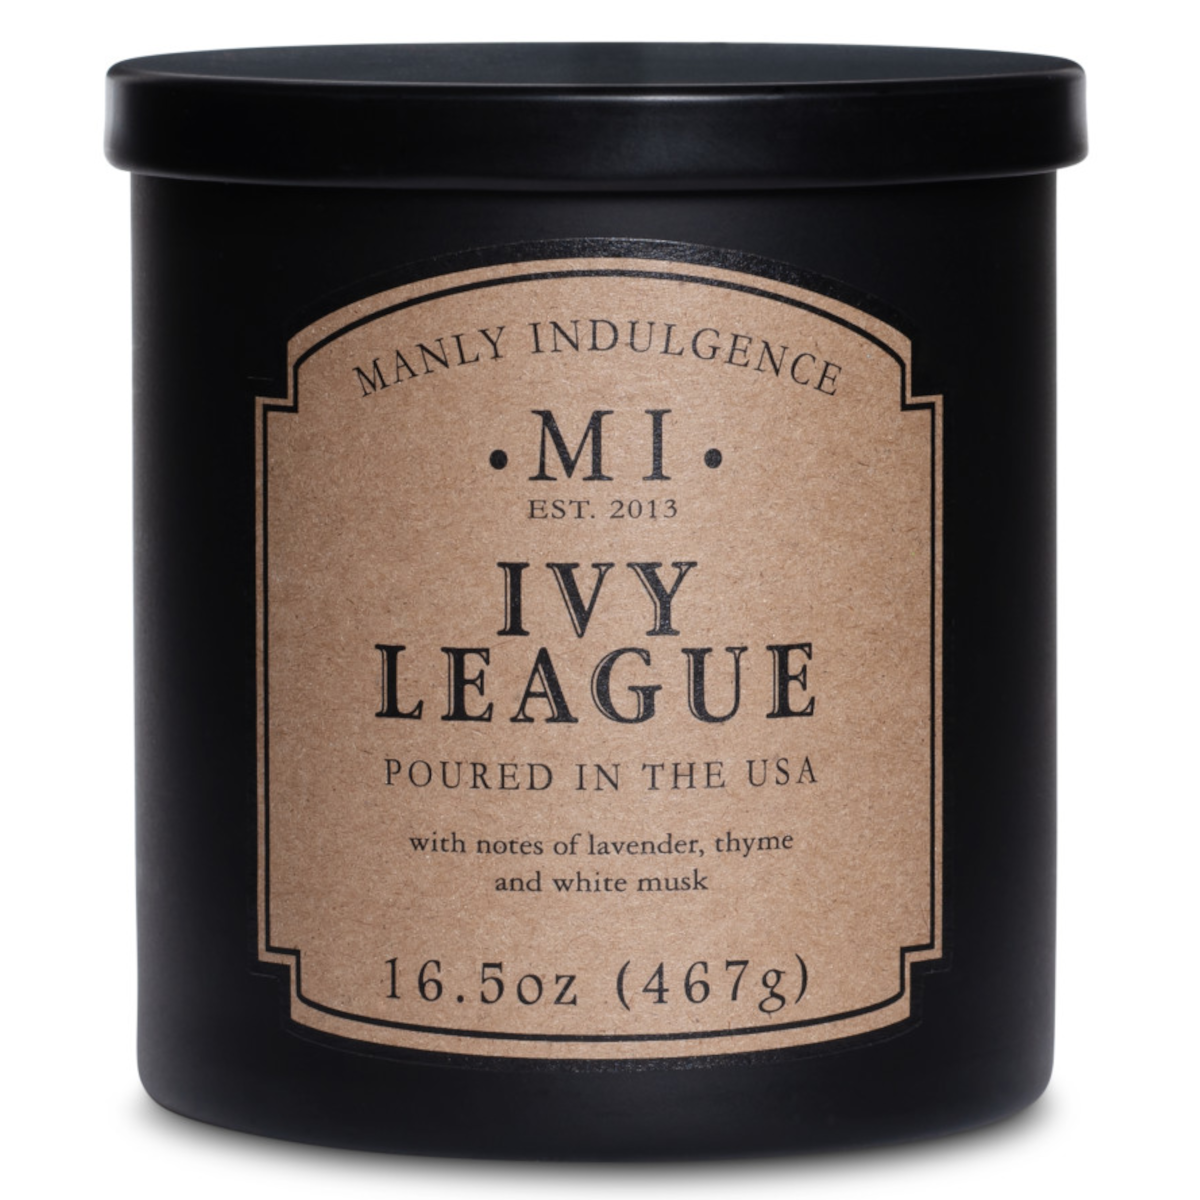 Colonial Candle - Manly Indulgence - Classic - Ivy League - geurkaars voor mannen - 467 gram Colonial Candle